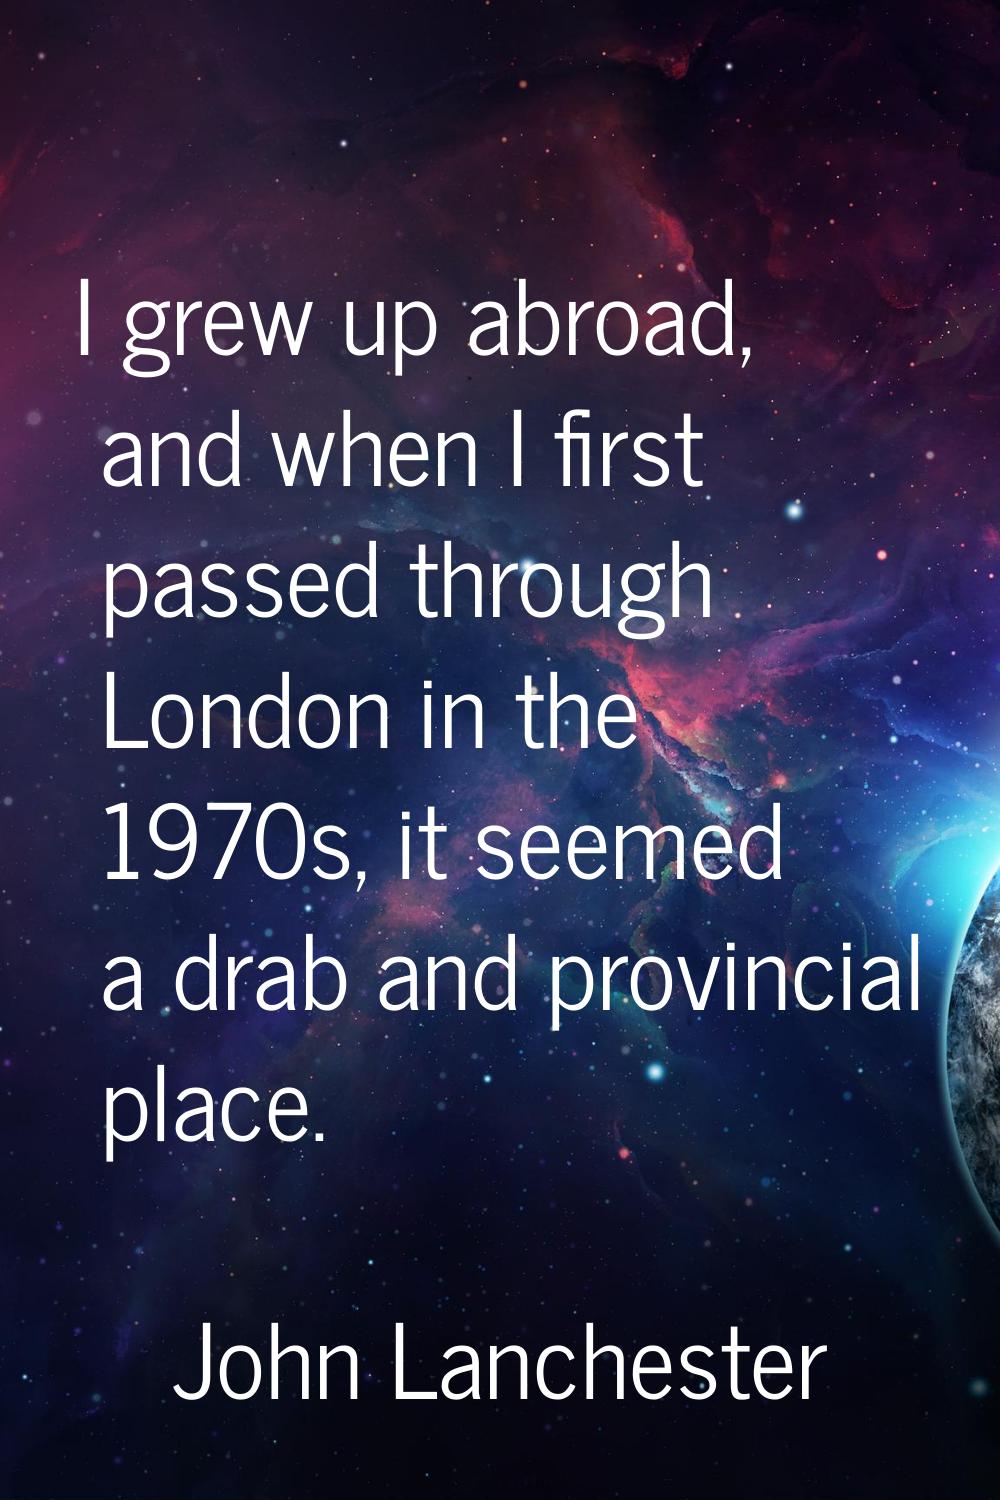 I grew up abroad, and when I first passed through London in the 1970s, it seemed a drab and provinc